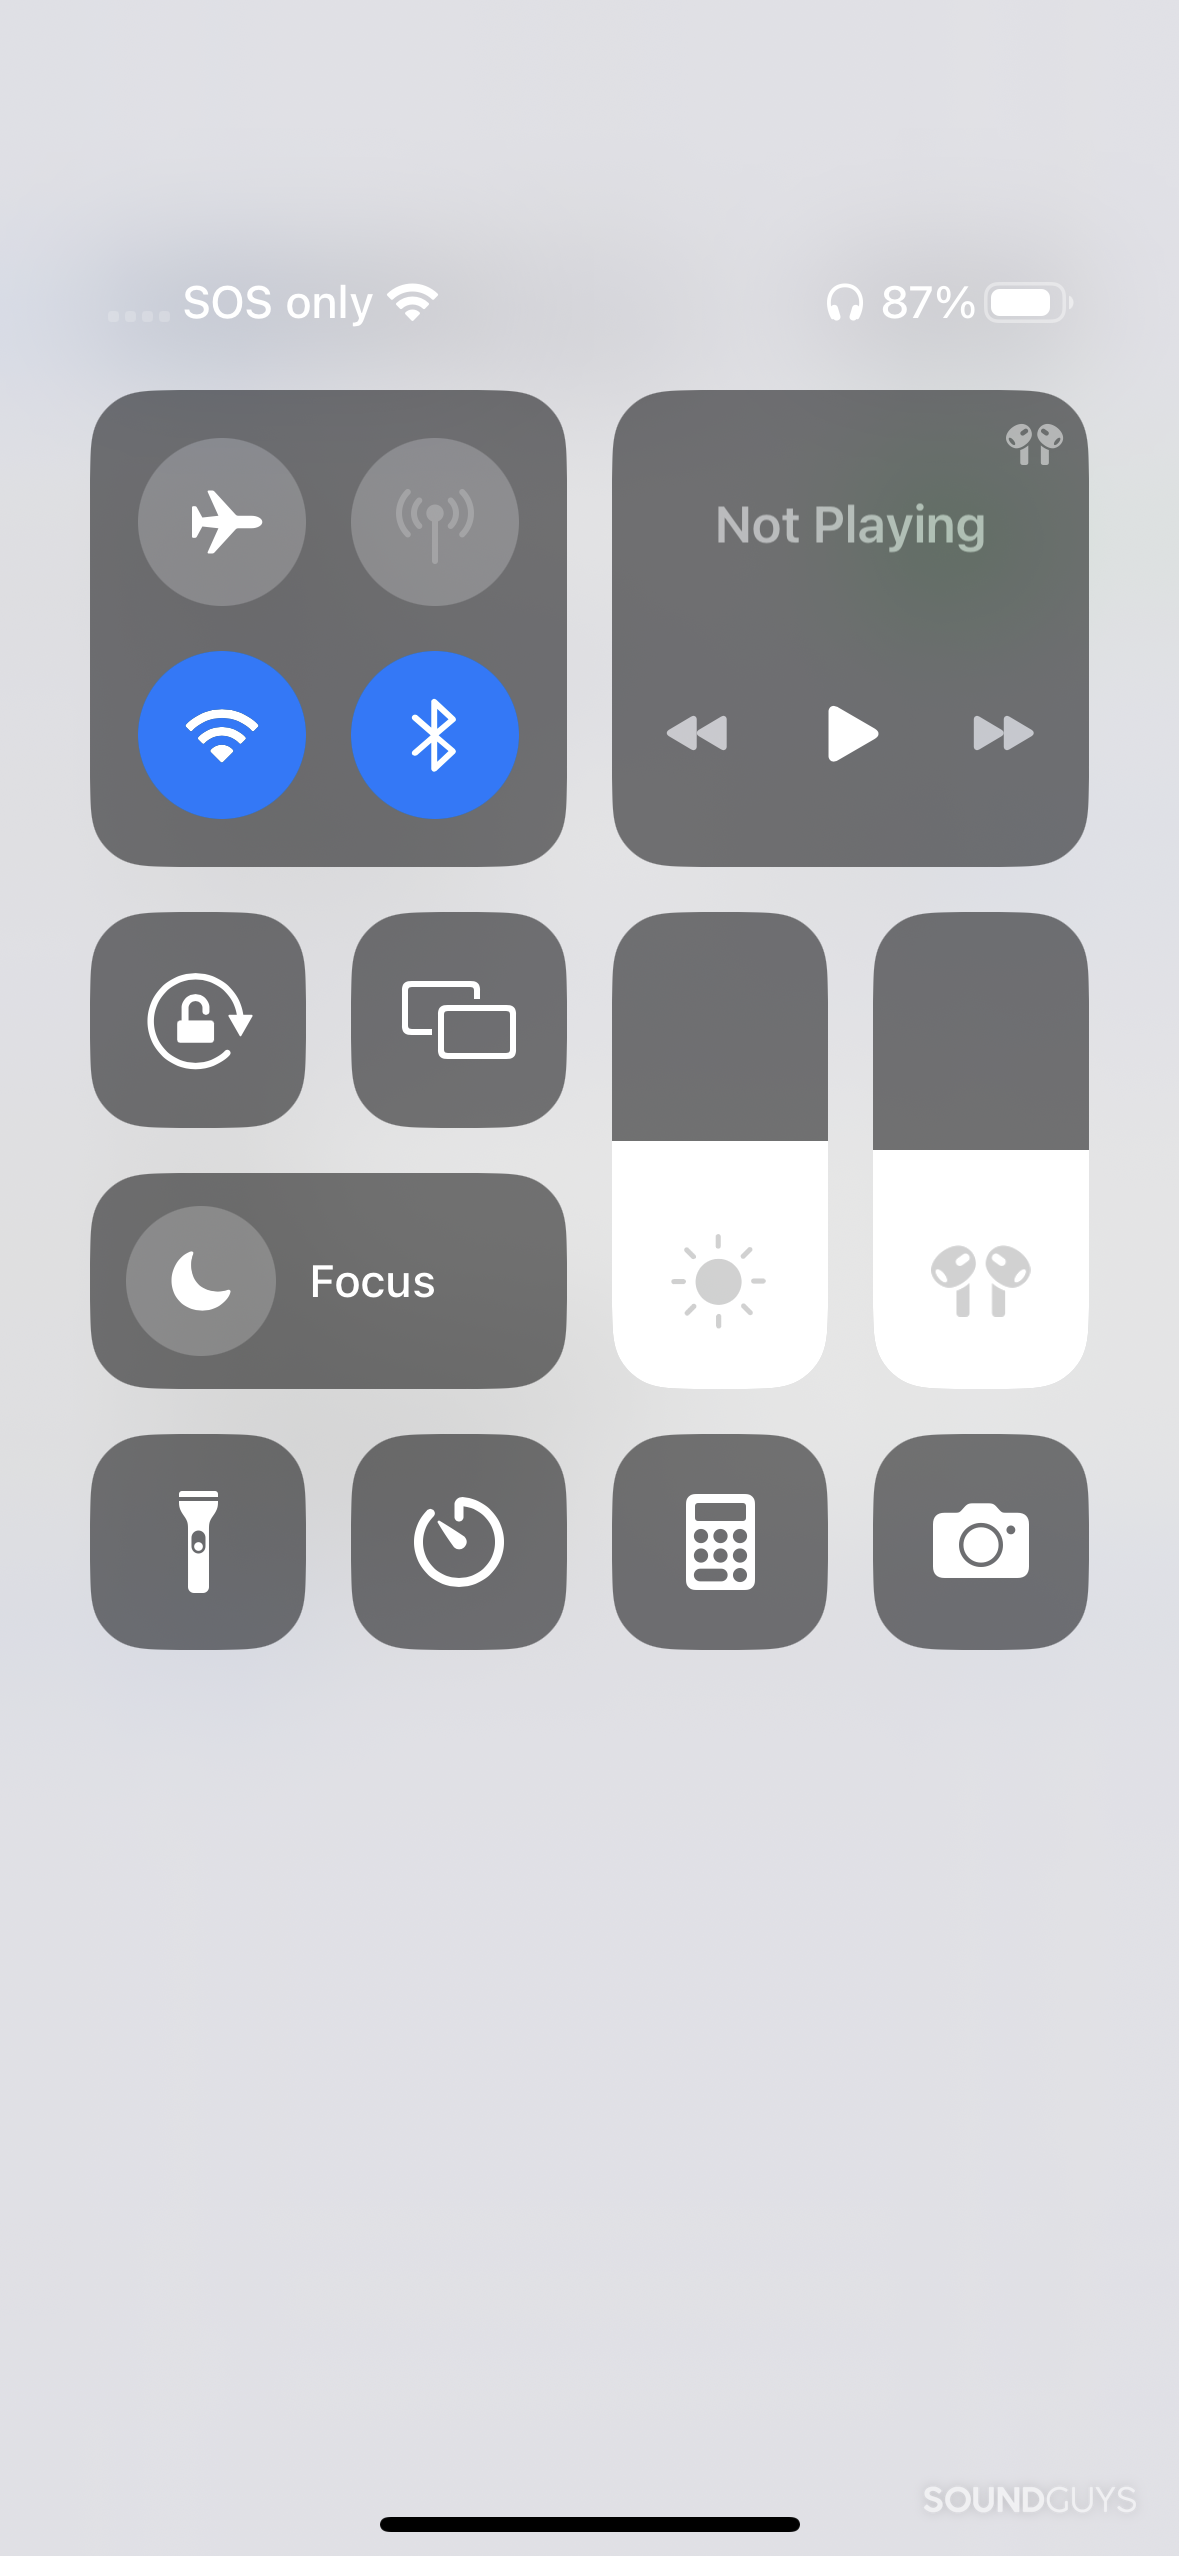 The control center on iOS, showing AirPods connected to the phone.